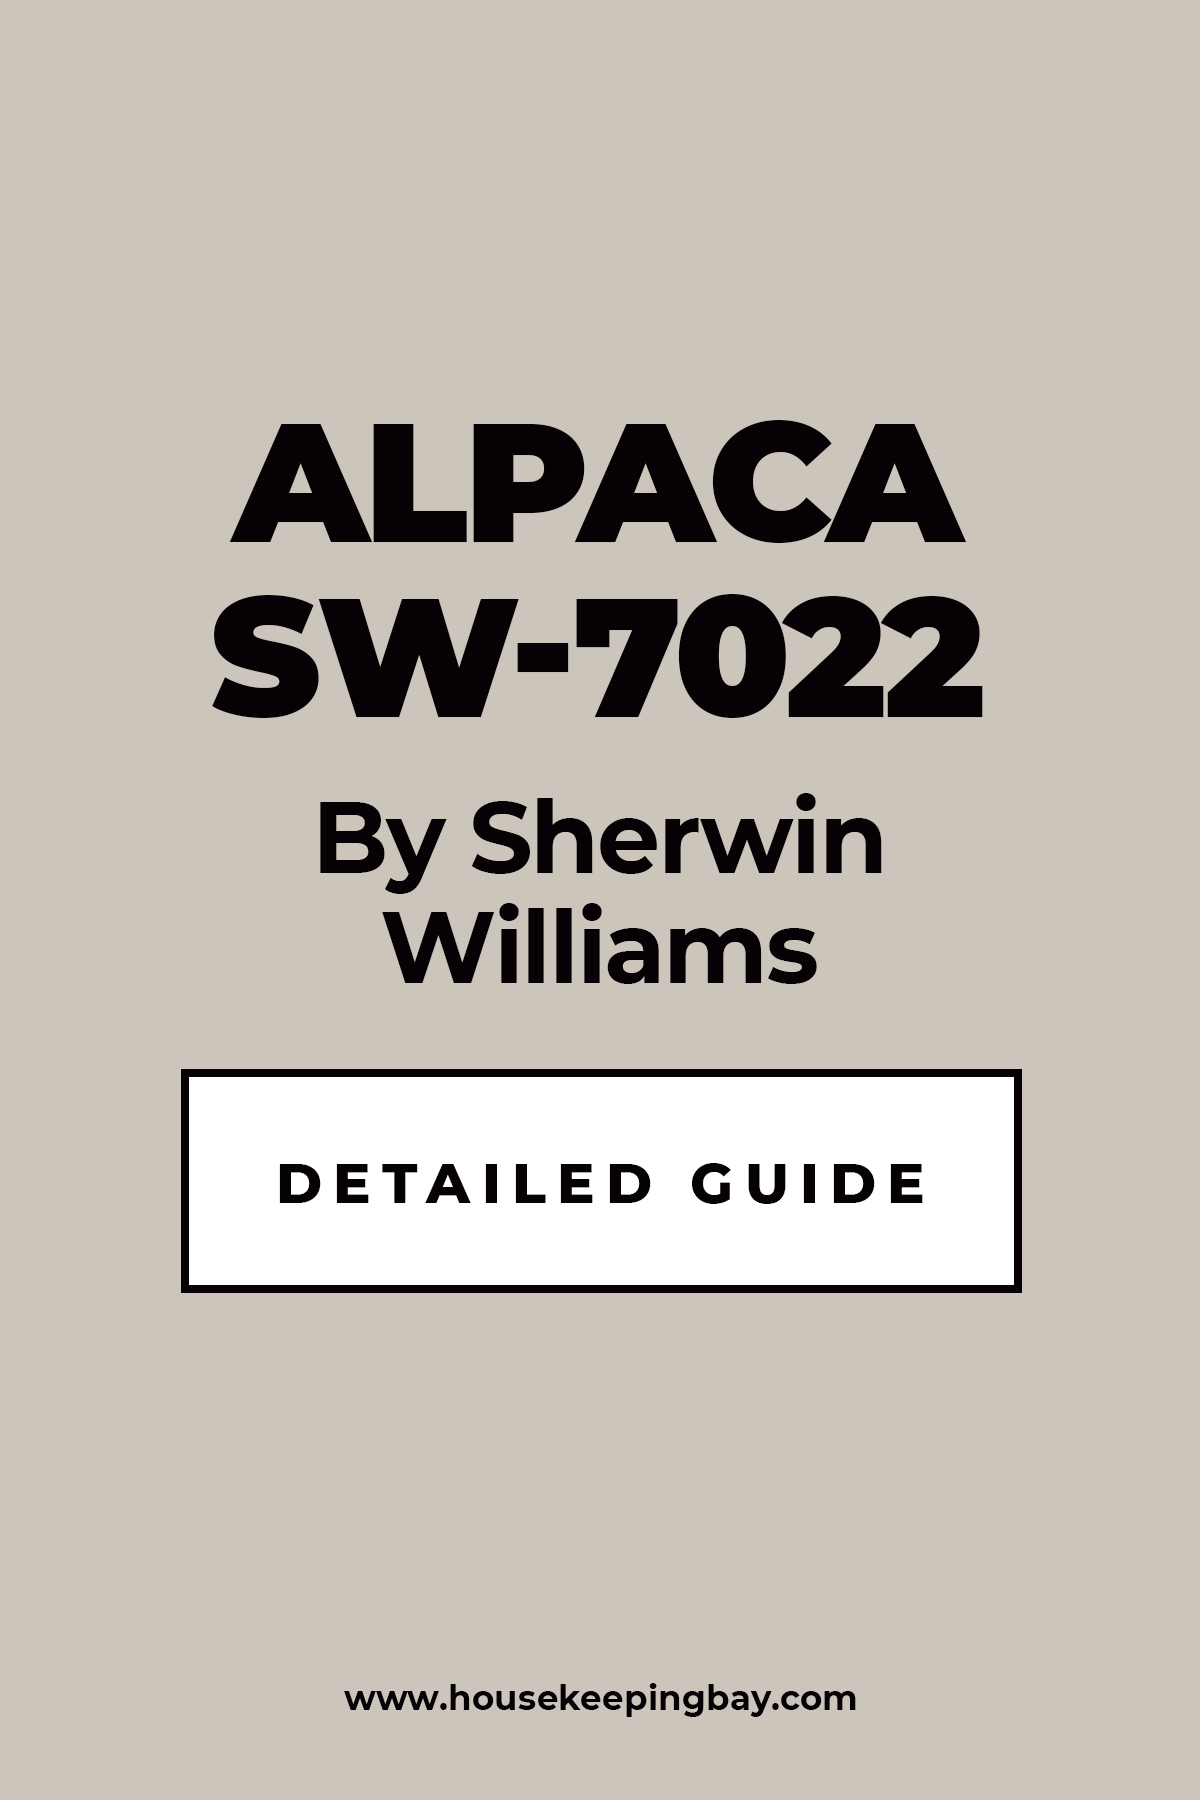 Alpaca SW 7022 By Sherwin Williams Detailed Guide